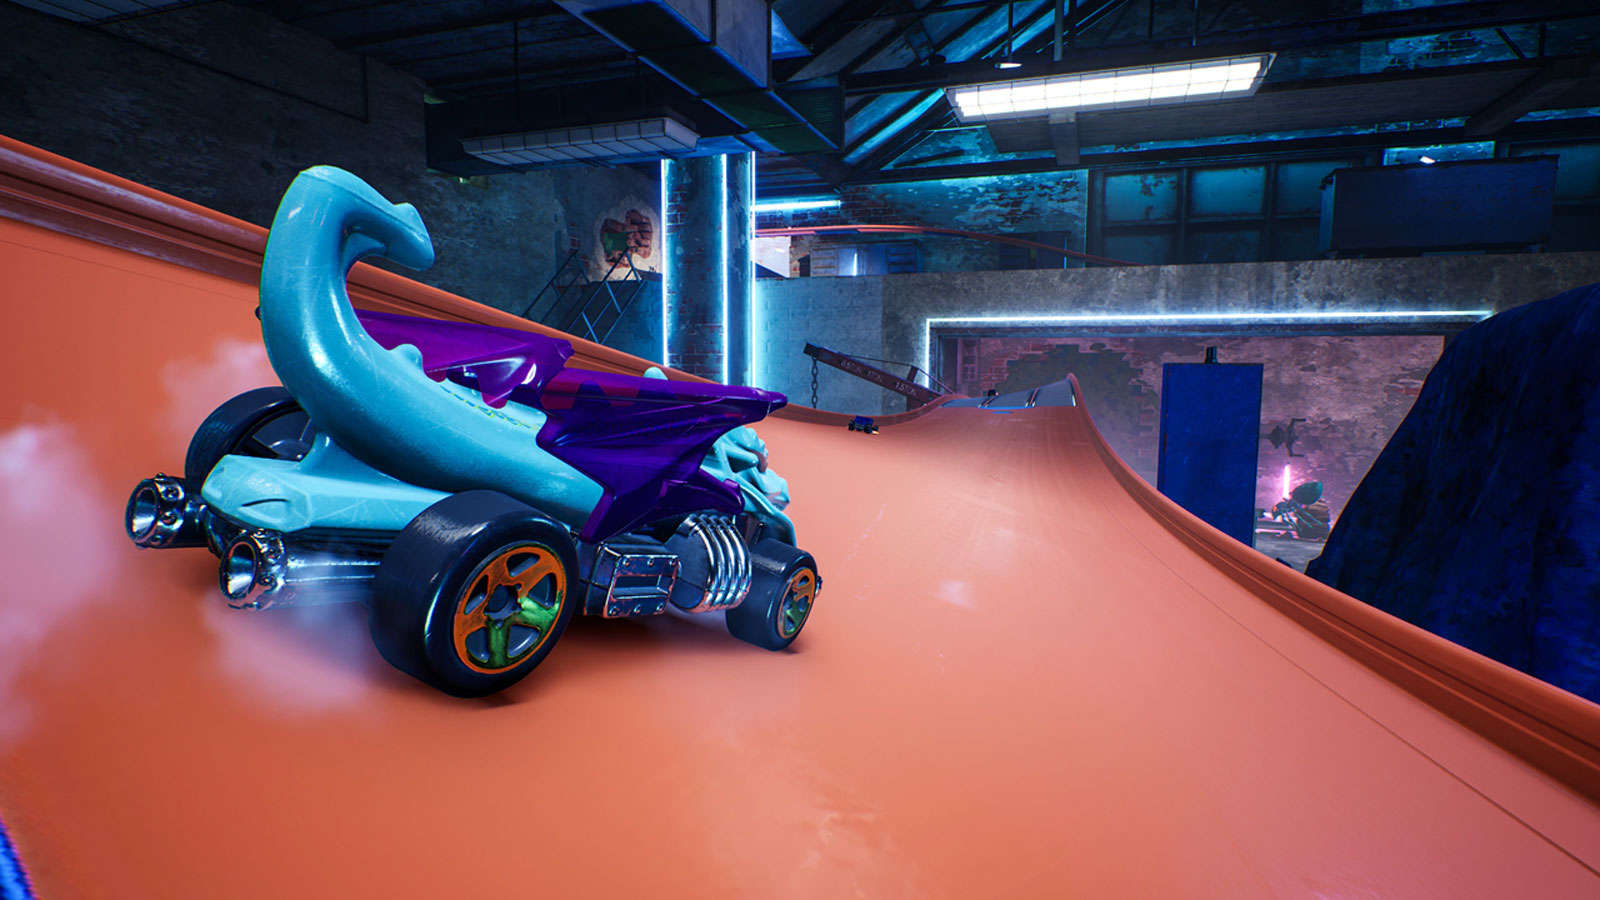 Hot Wheels Unleashed 2021 Wallpapers